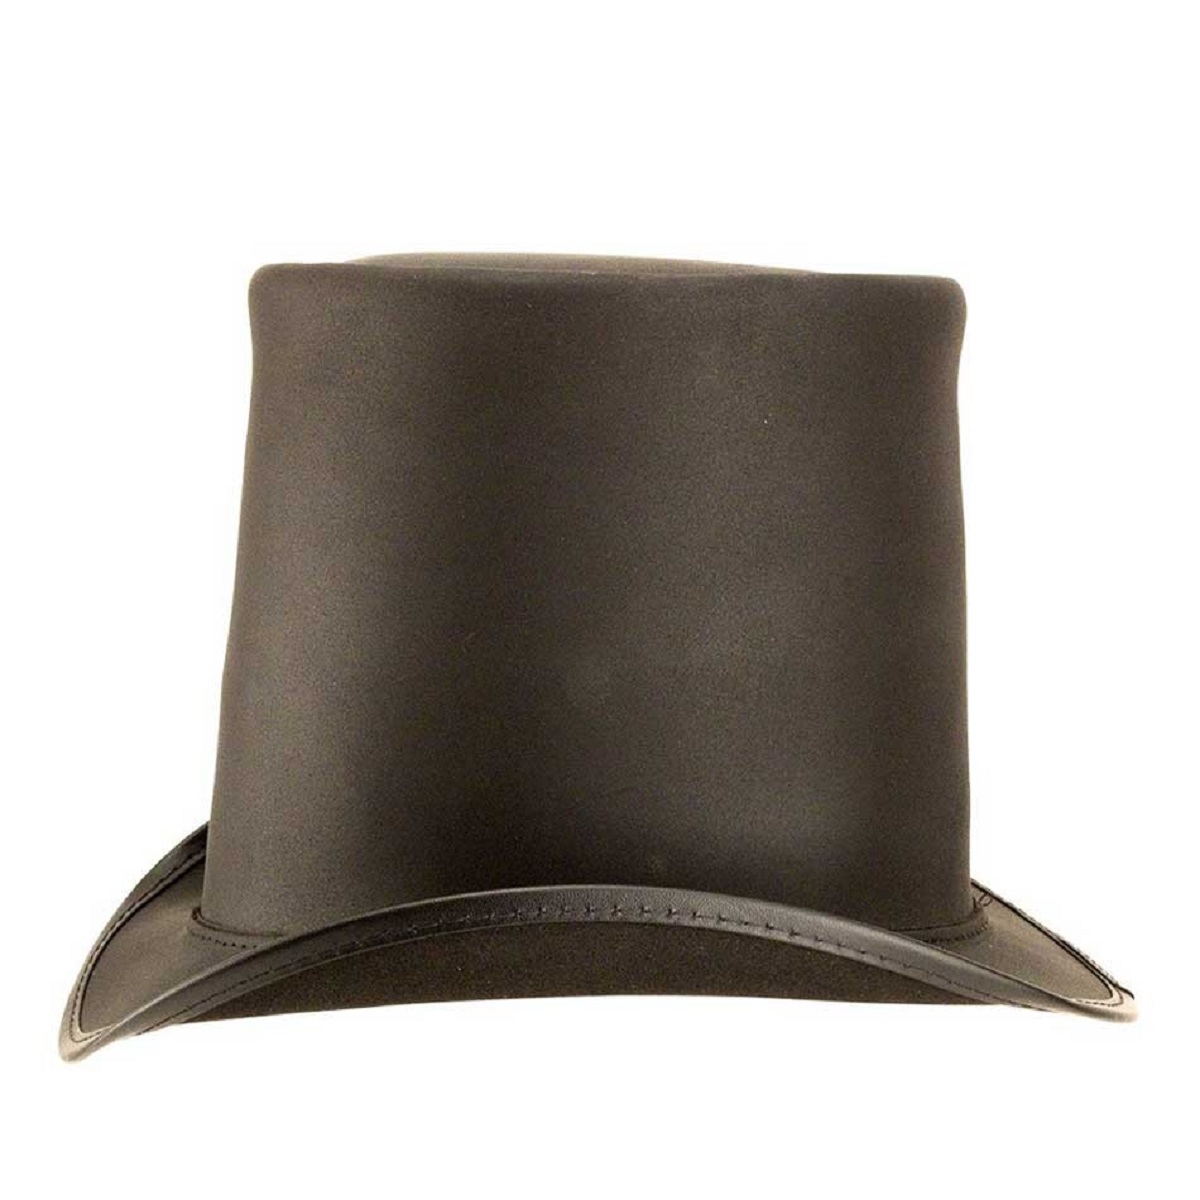 Head'n Home Hats（American Hat Makers）/ Stove piper（BLACK）レザー トップハット シルクハット